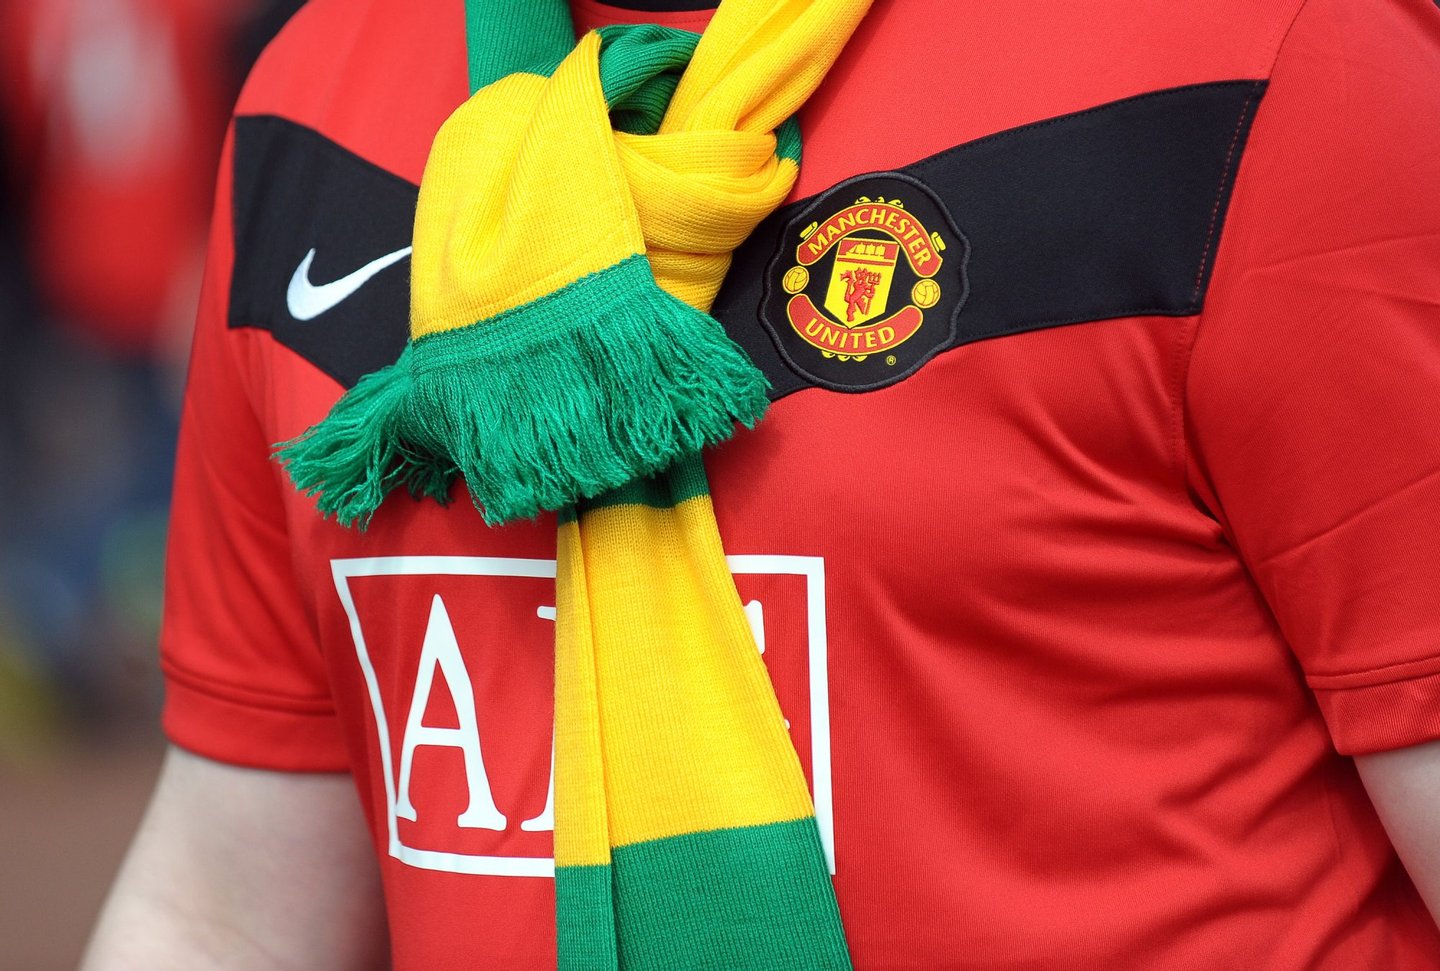 A Manchester United supporter wears a green and gold scarf in protest against the Glazer family's owenership of the club ahead of their English Premier League football match against Tottenham Hotspur at Old Trafford in Manchester, north-west England, on April 24, 2010. AFP PHOTO/PAUL ELLIS - FOR EDITORIAL USE ONLY Additional licence required for any commercial/promotional use or use on TV or internet (except identical online version of newspaper) of Premier League/Football League photos. Tel DataCo +44 207 2981656. Do not alter/modify photo. (Photo credit should read PAUL ELLIS/AFP/Getty Images)